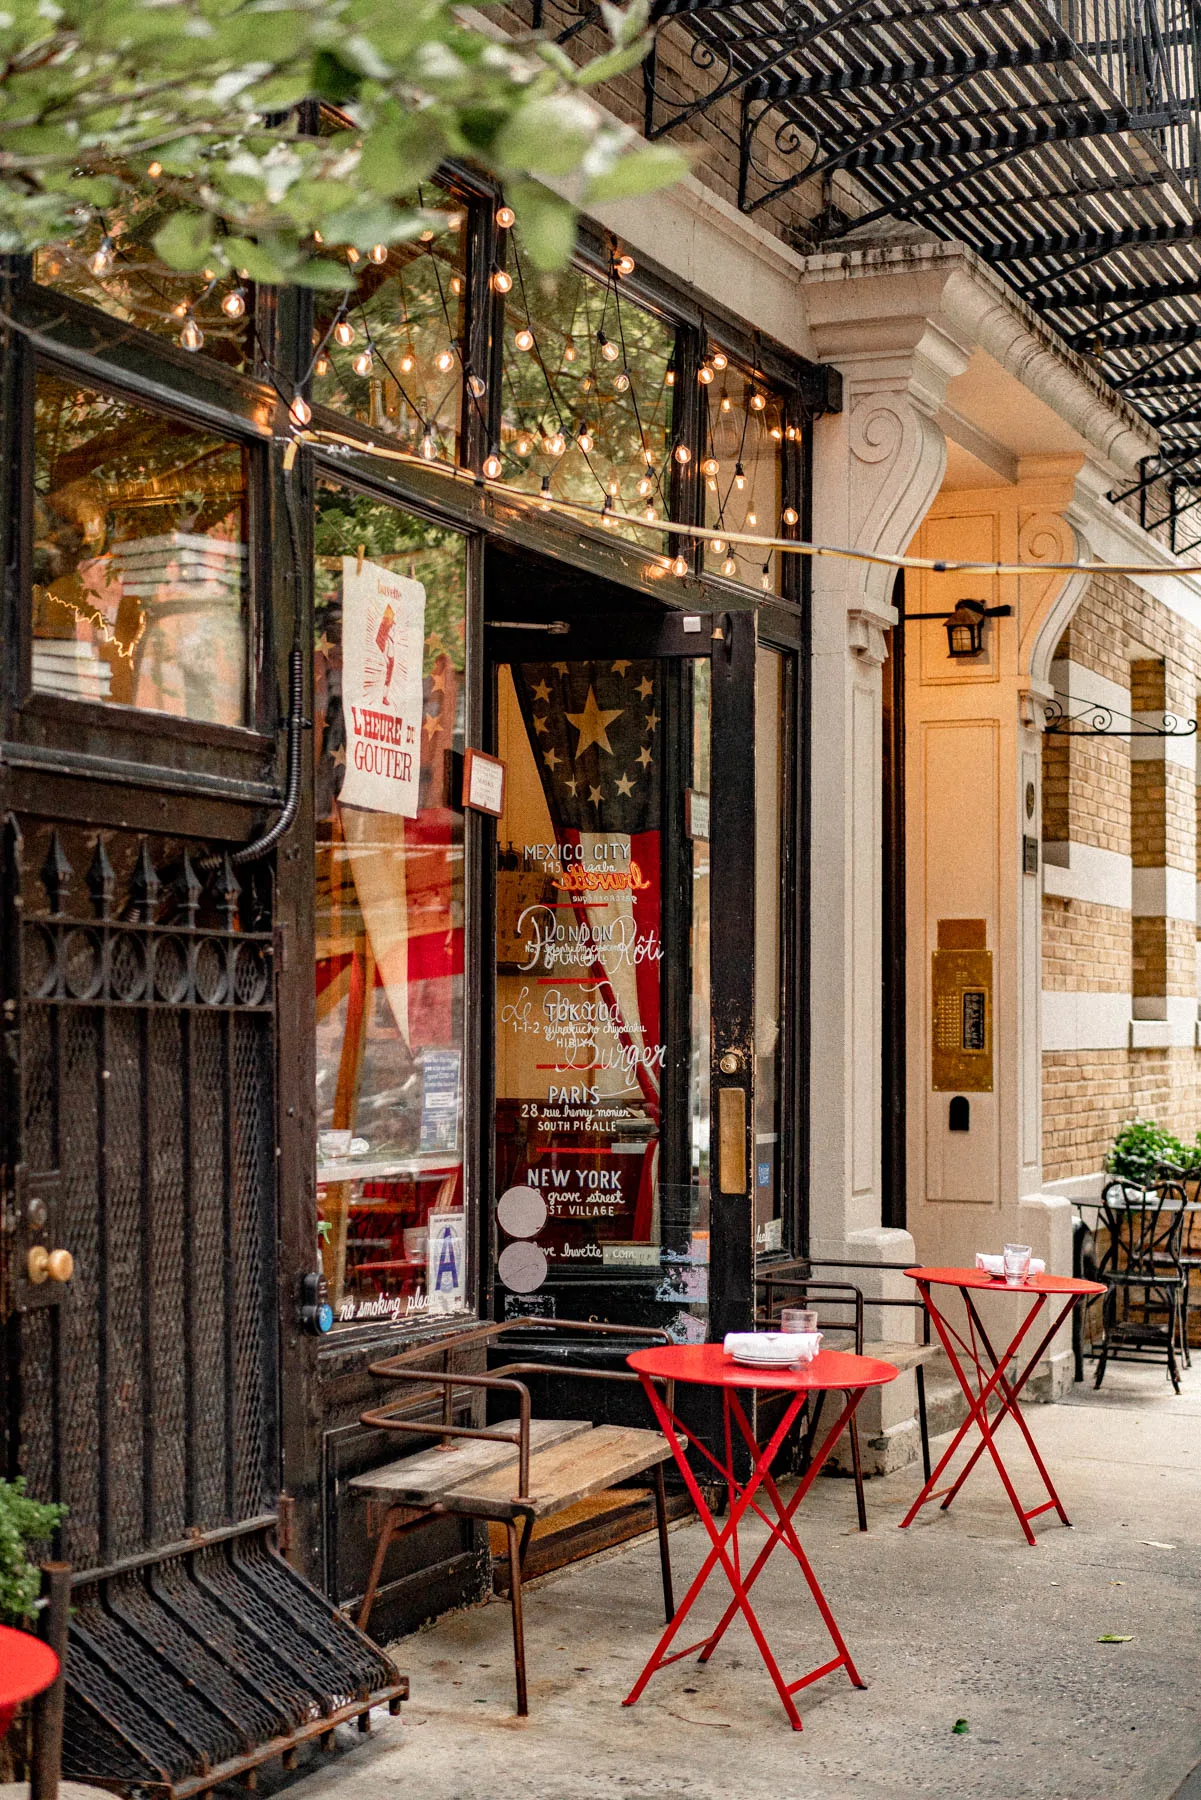 Best things to do West Village NYC
Buvette West Village